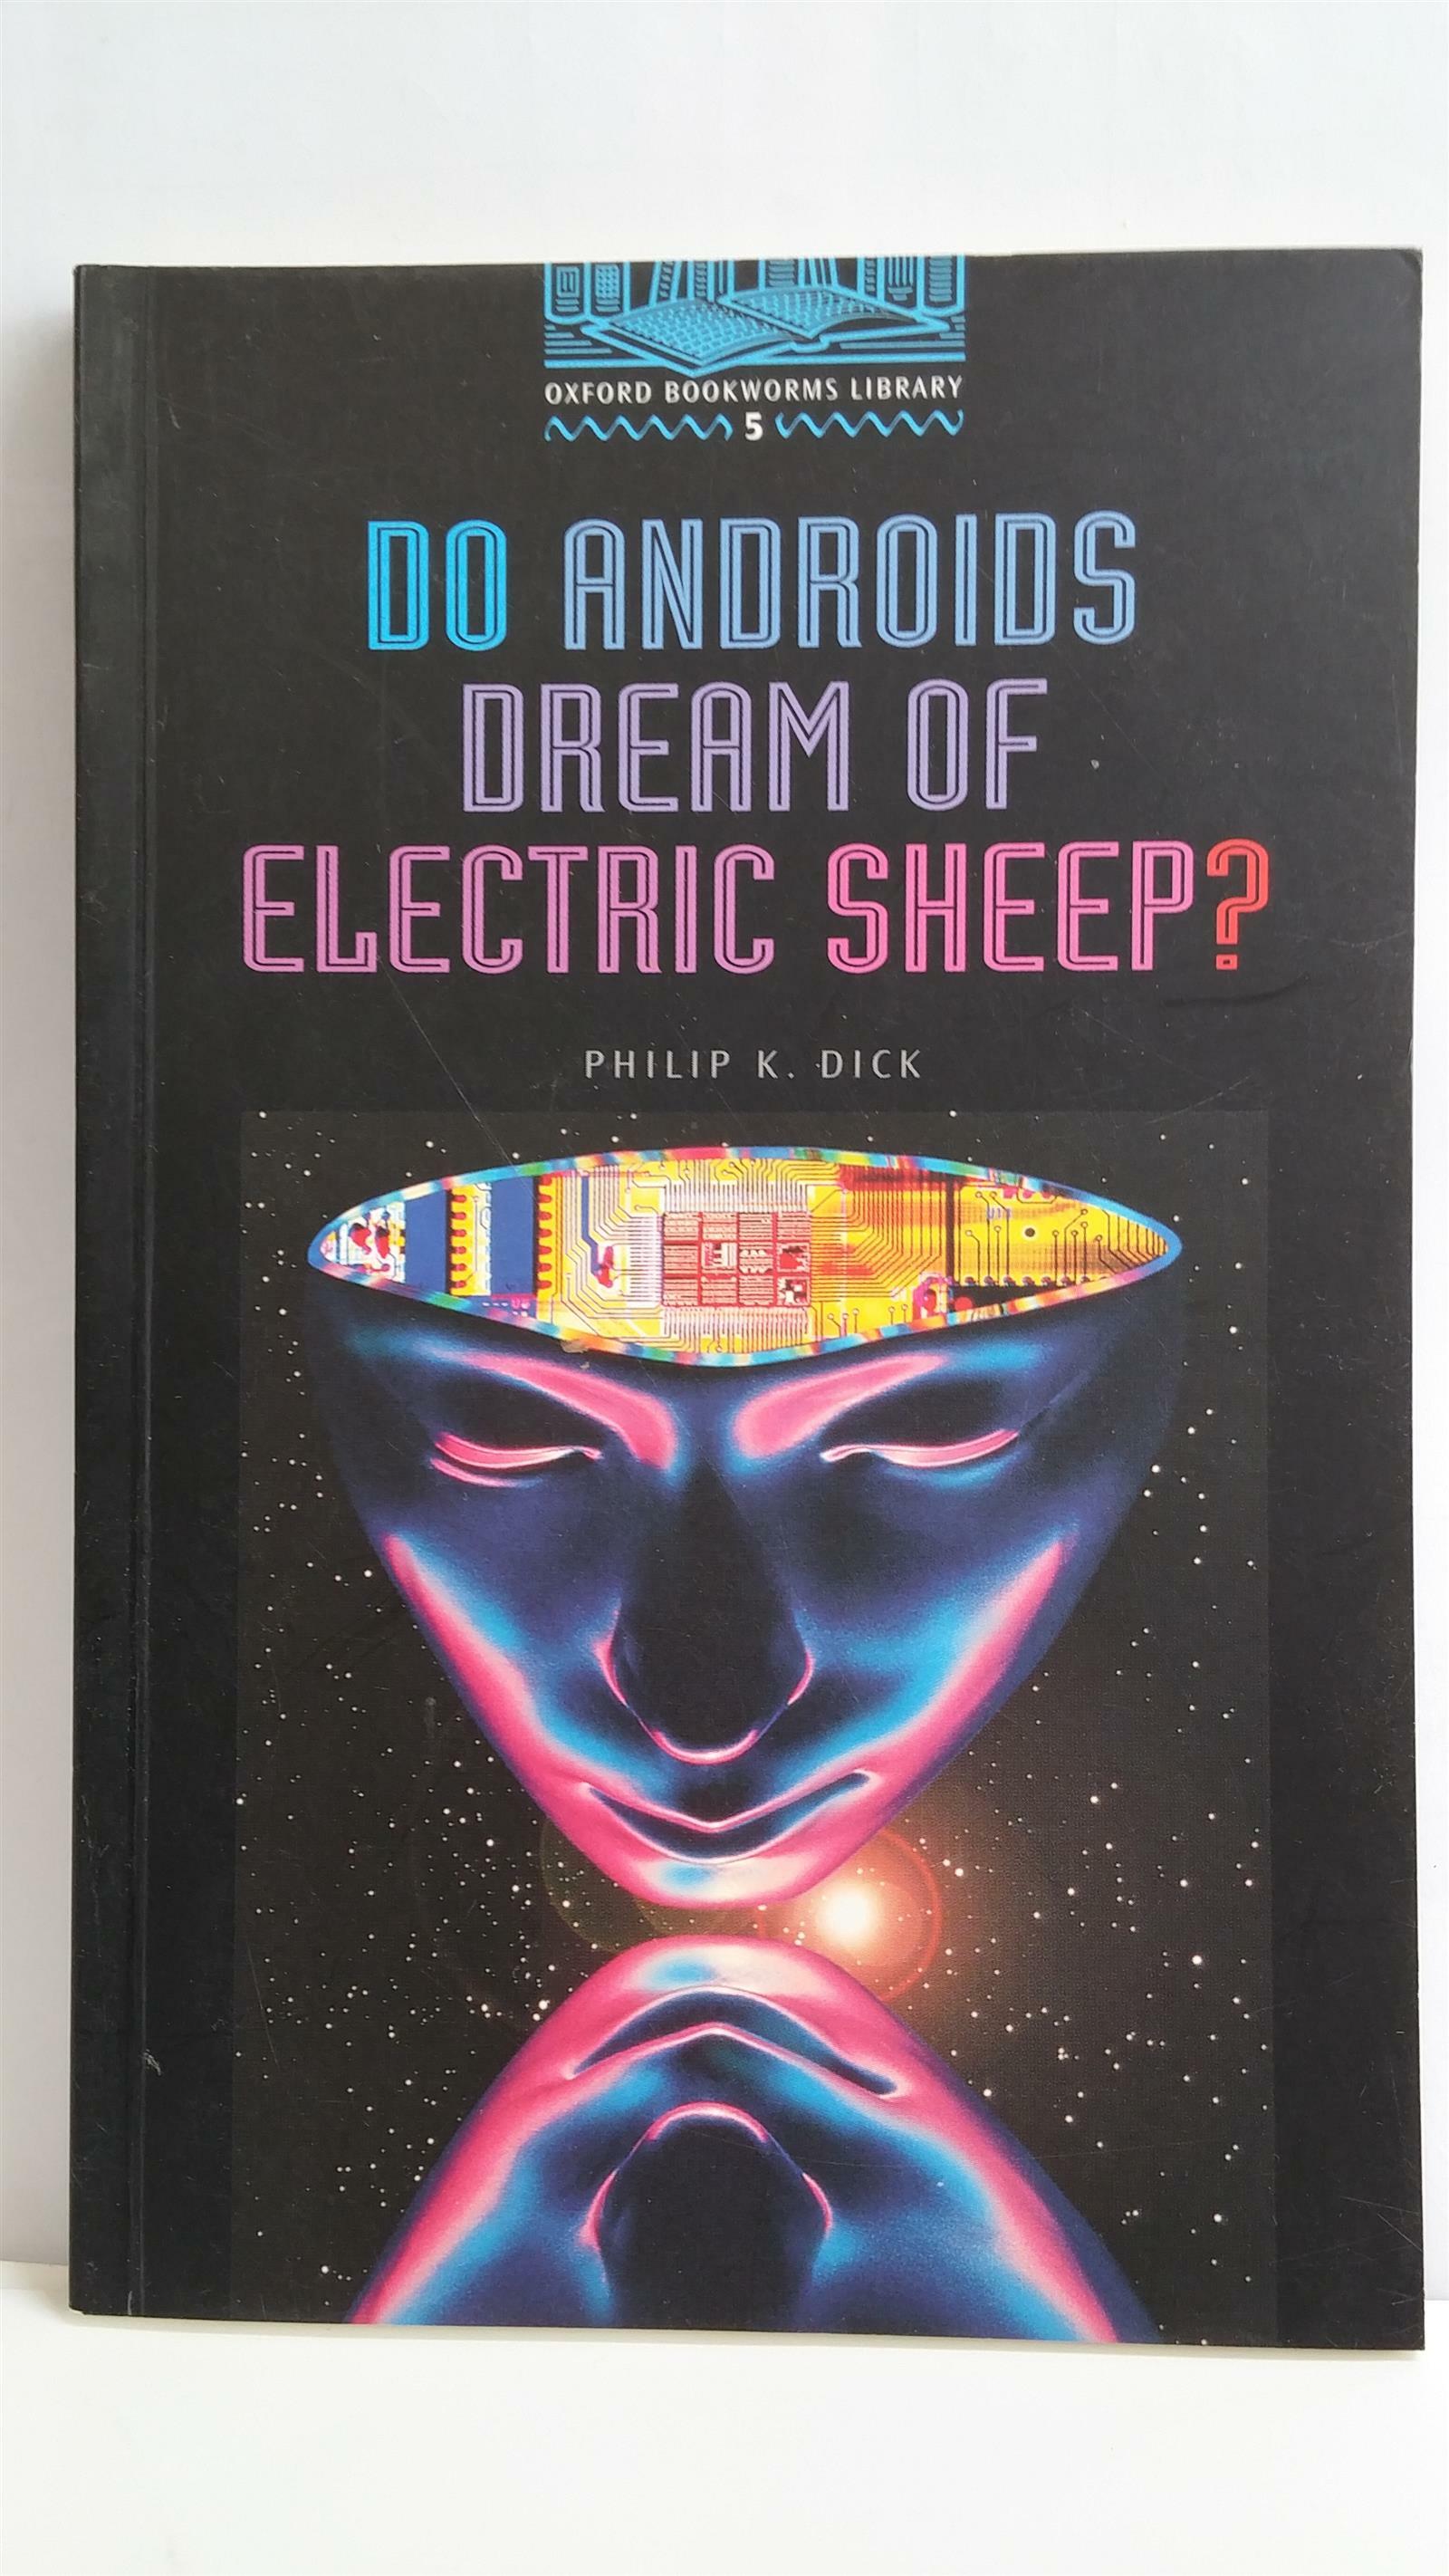 do androids dream of electric sheep?